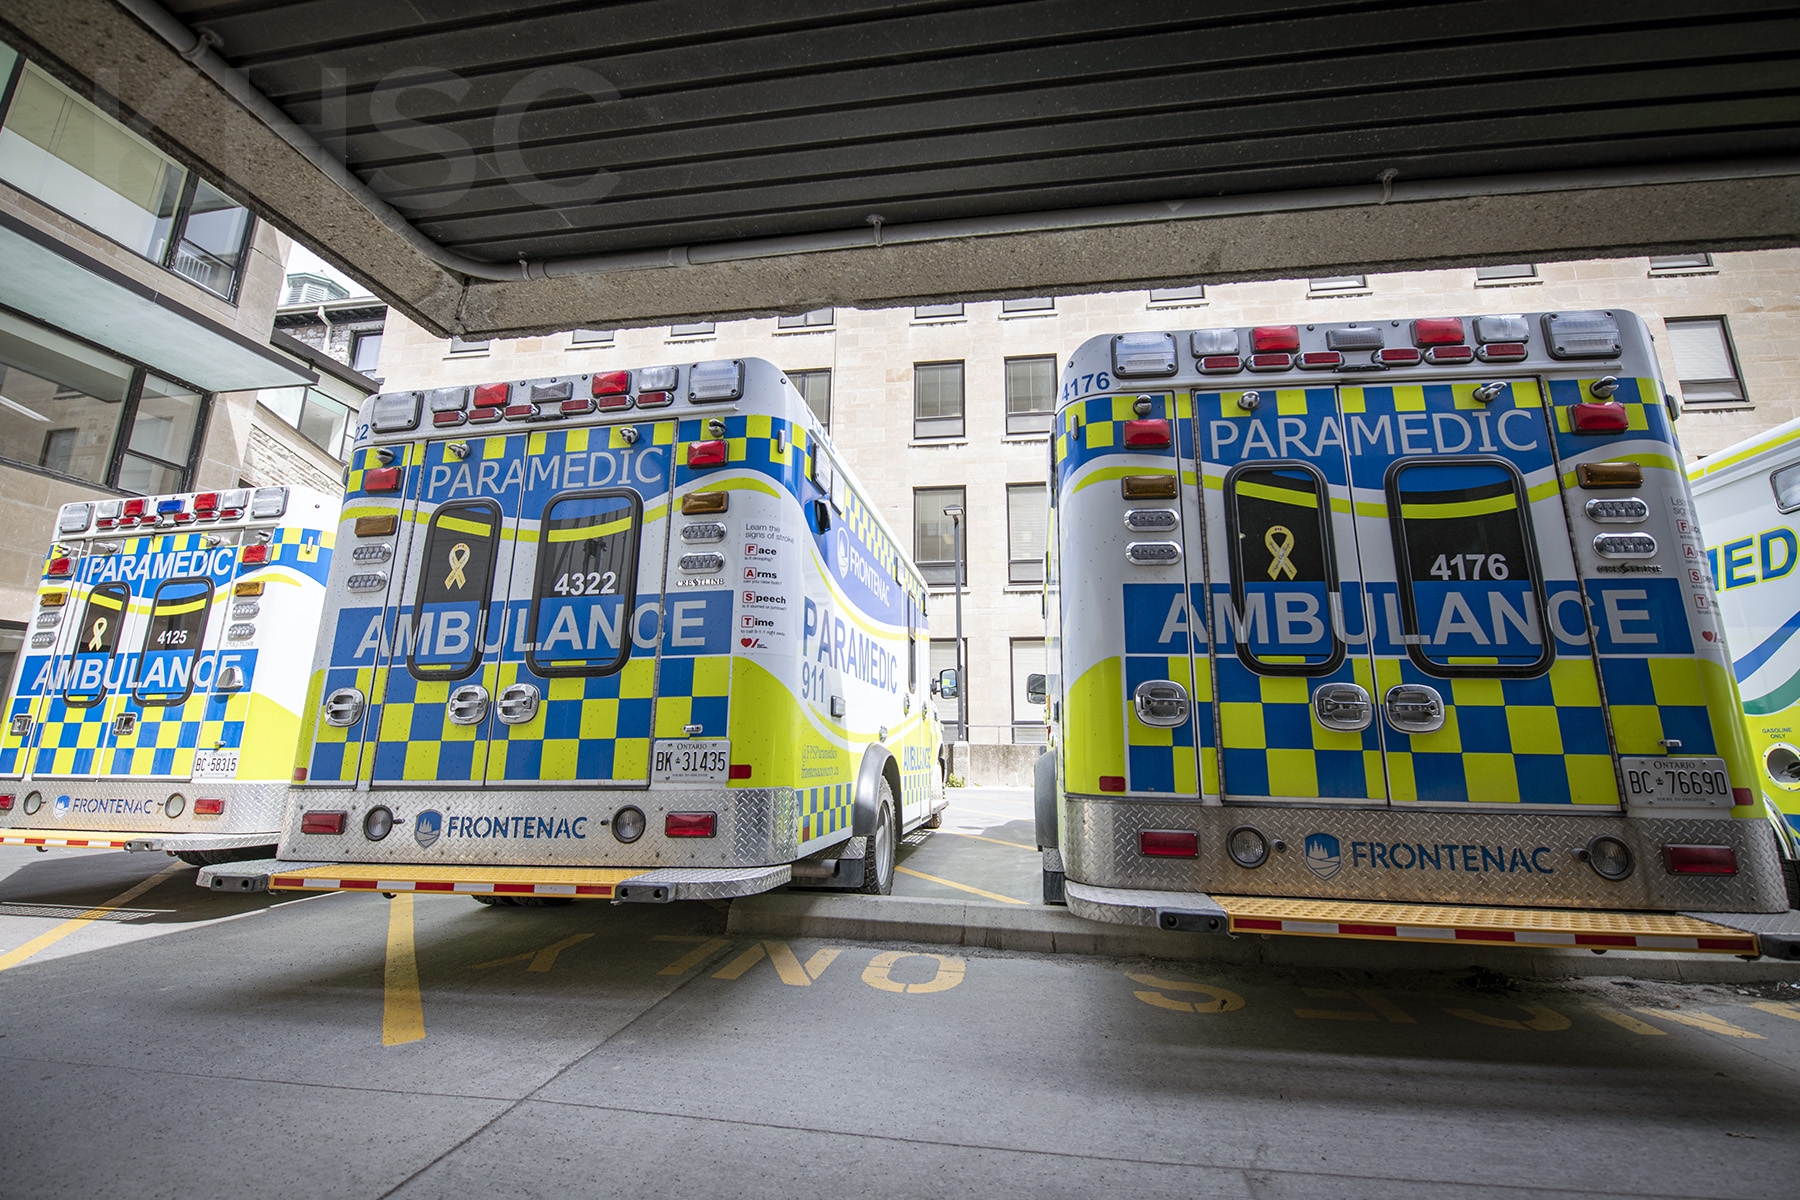 Ambulances offload patients at the Emergency Department at the KGH site